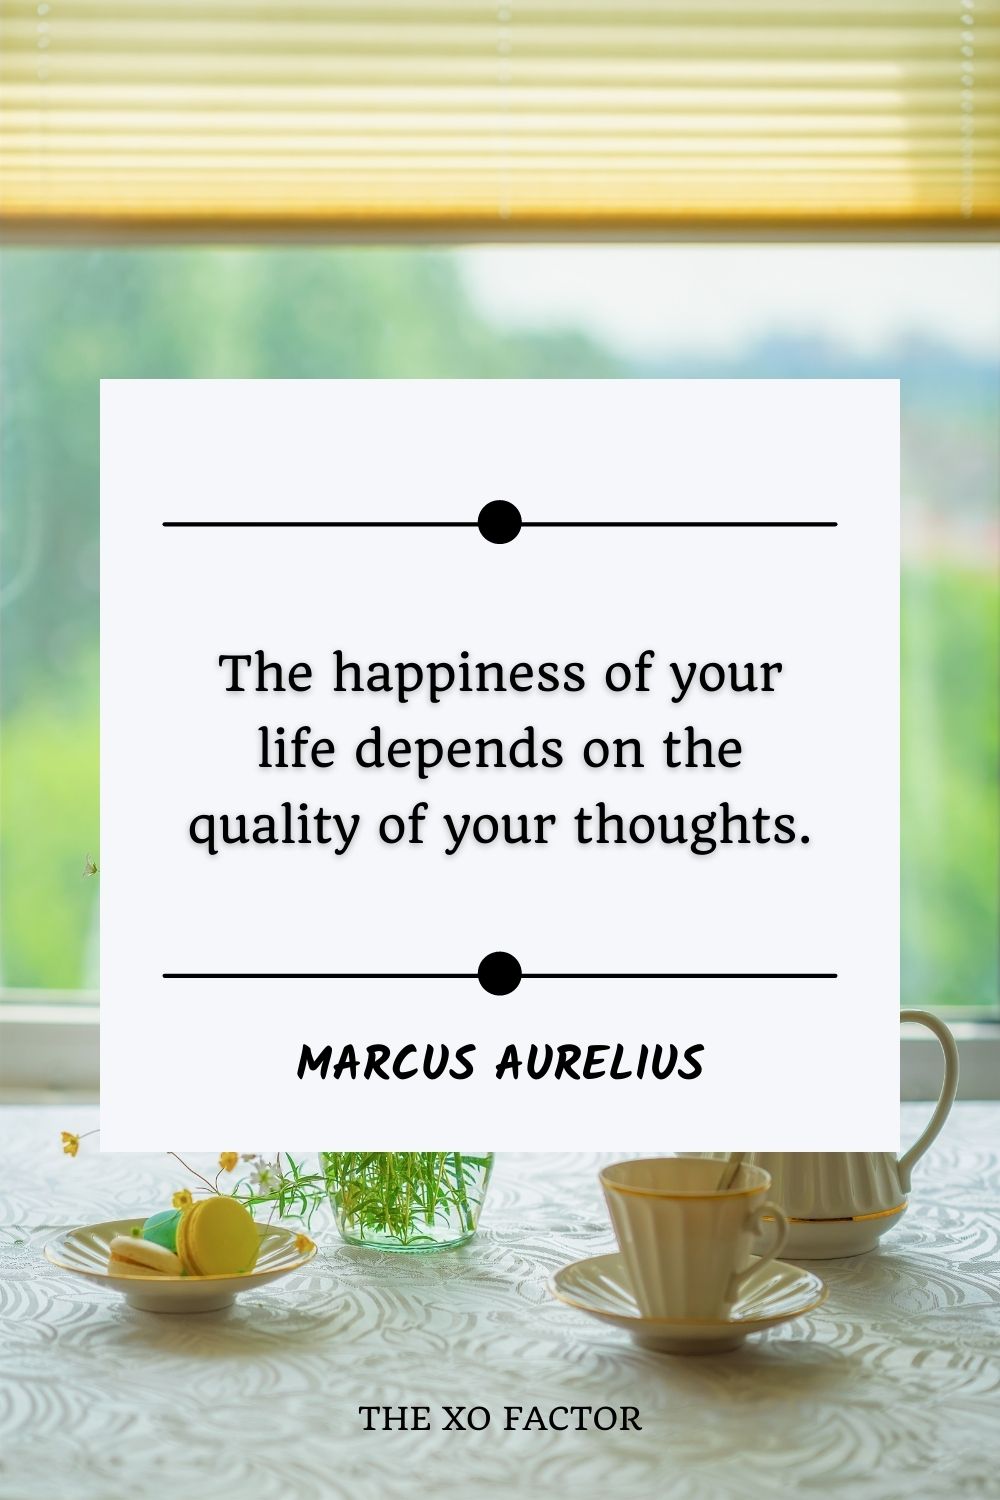 The happiness of your life depends on the quality of your thoughts.” – Marcus Aurelius